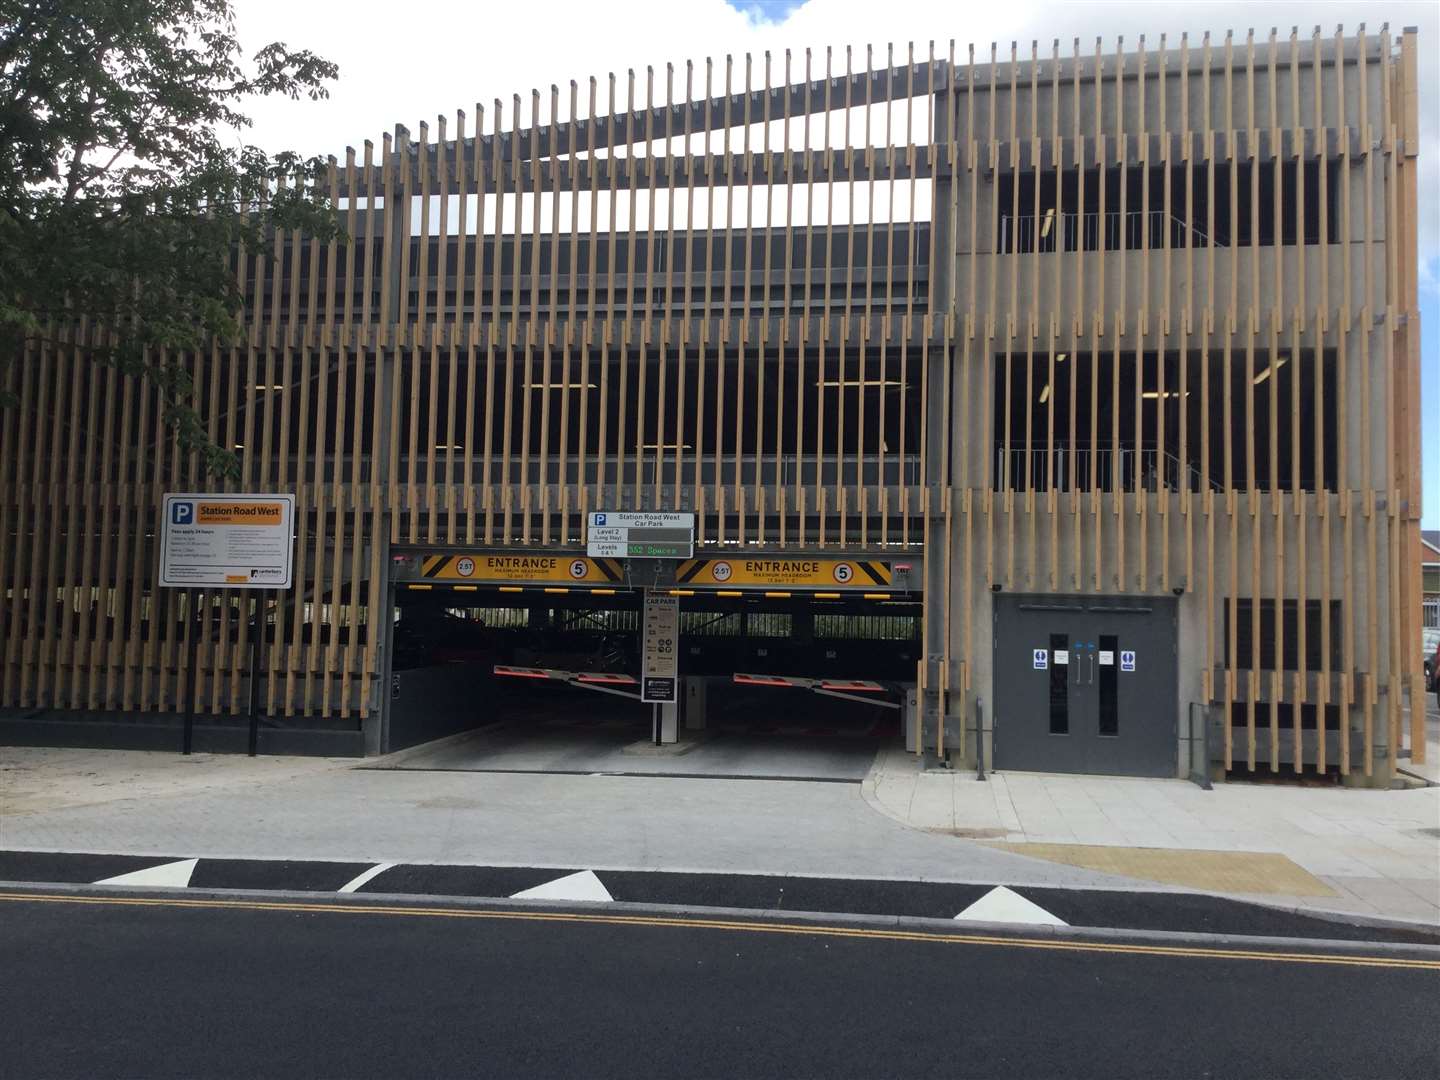 The new car park is covered in wooden cladding